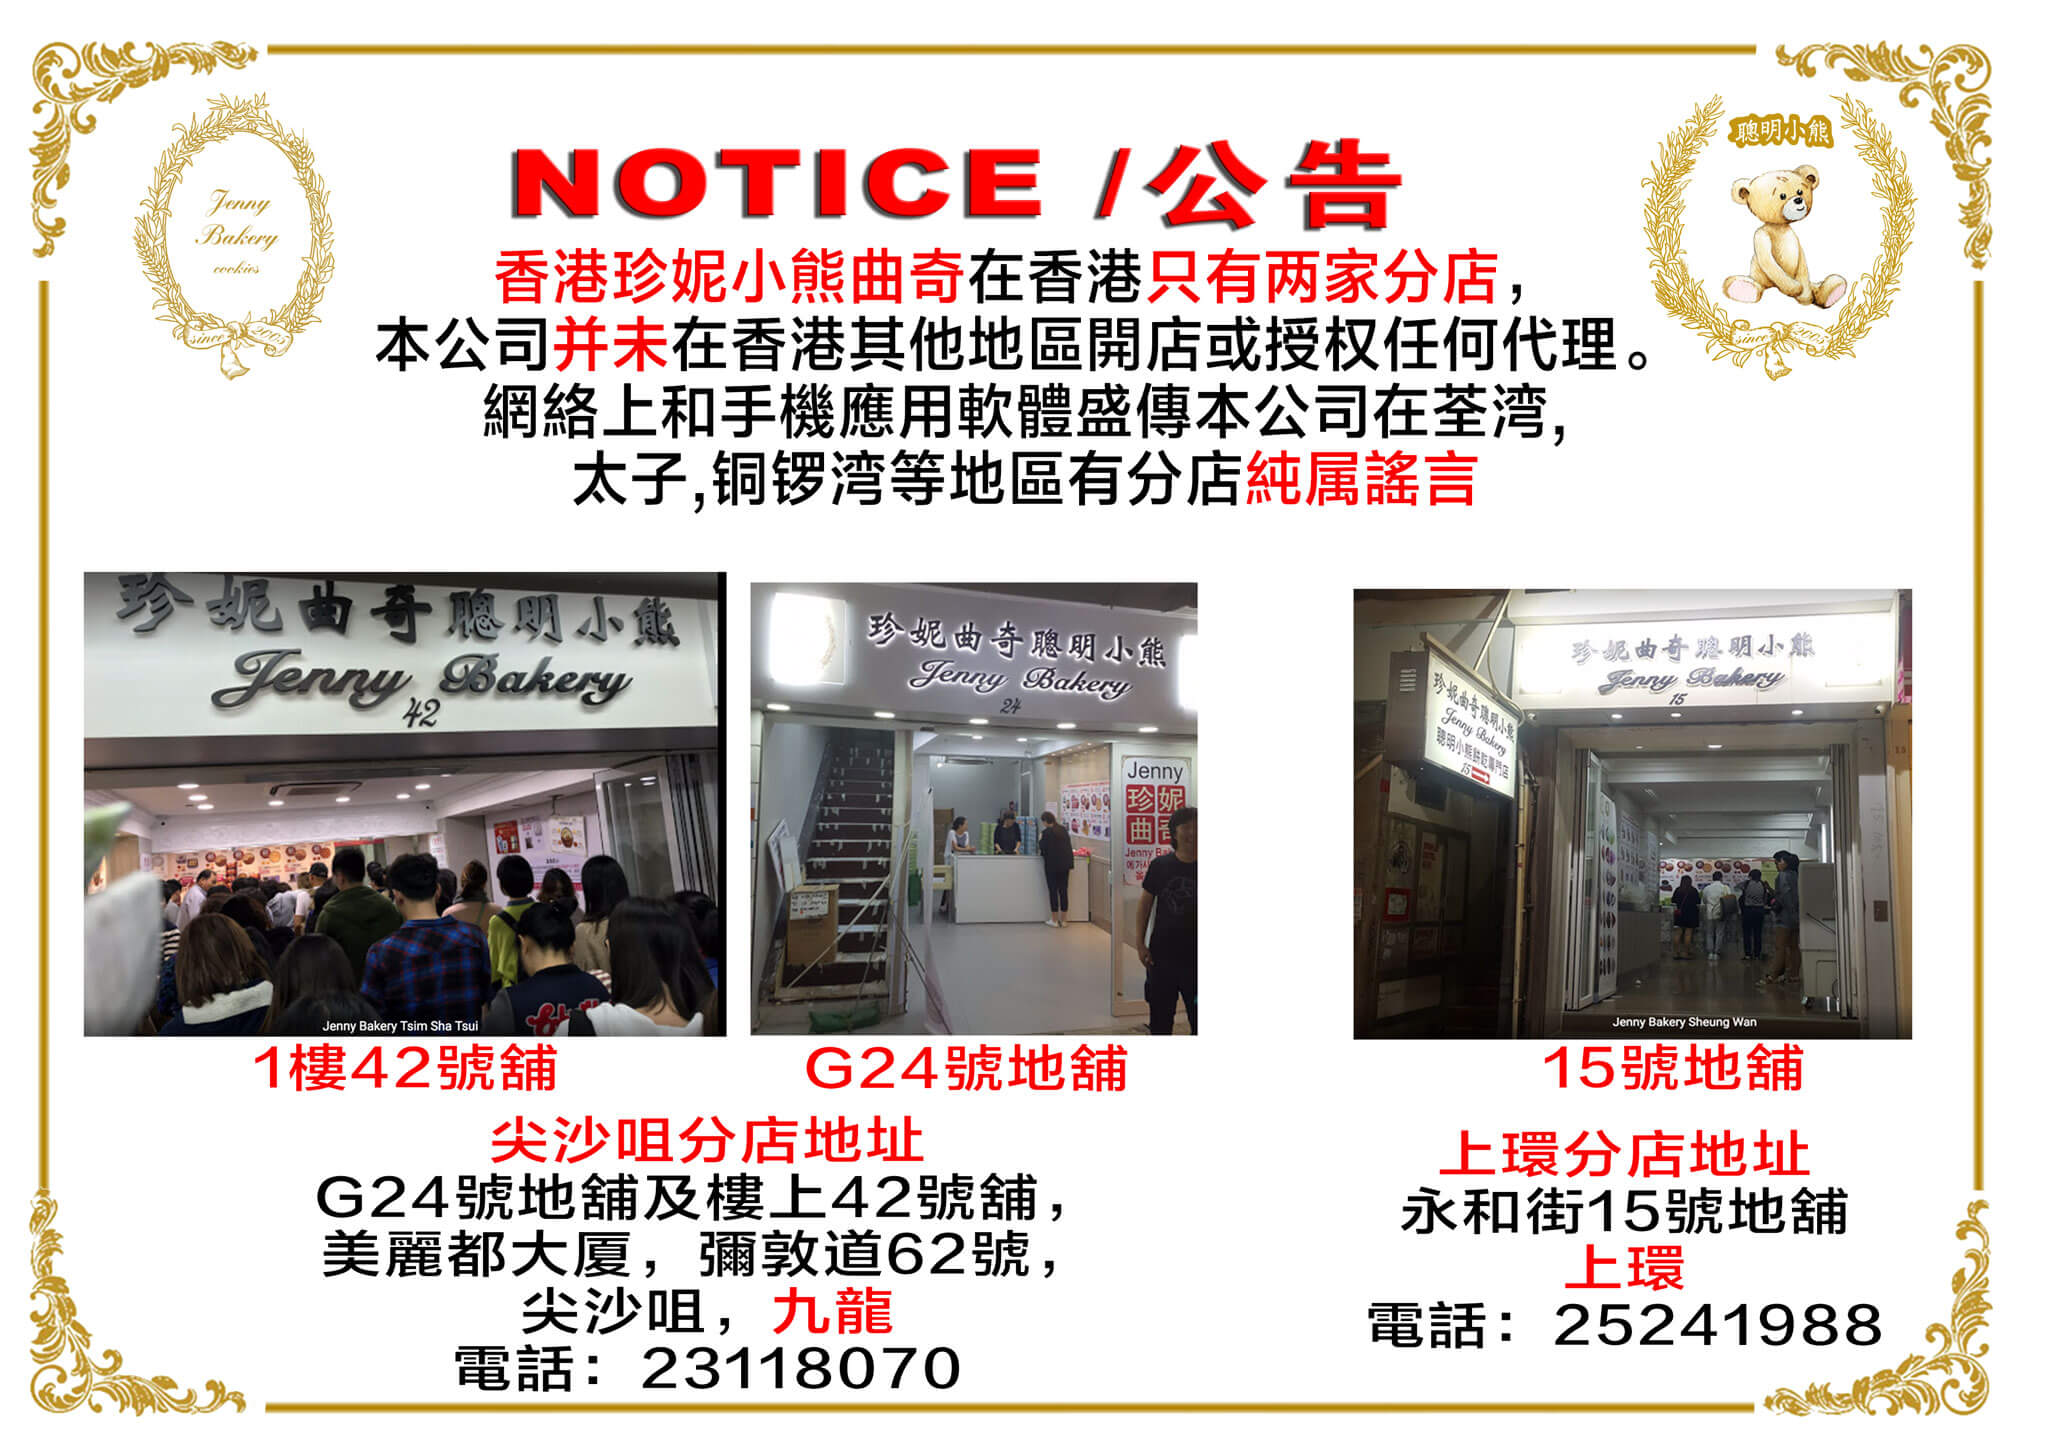 IMPORTANT NOTICE Jenny Bakery Jenny Bakery has only 2 branches in Hong Kong. We do not have any authorized resellers or distributors in any other location within Hong Kong.